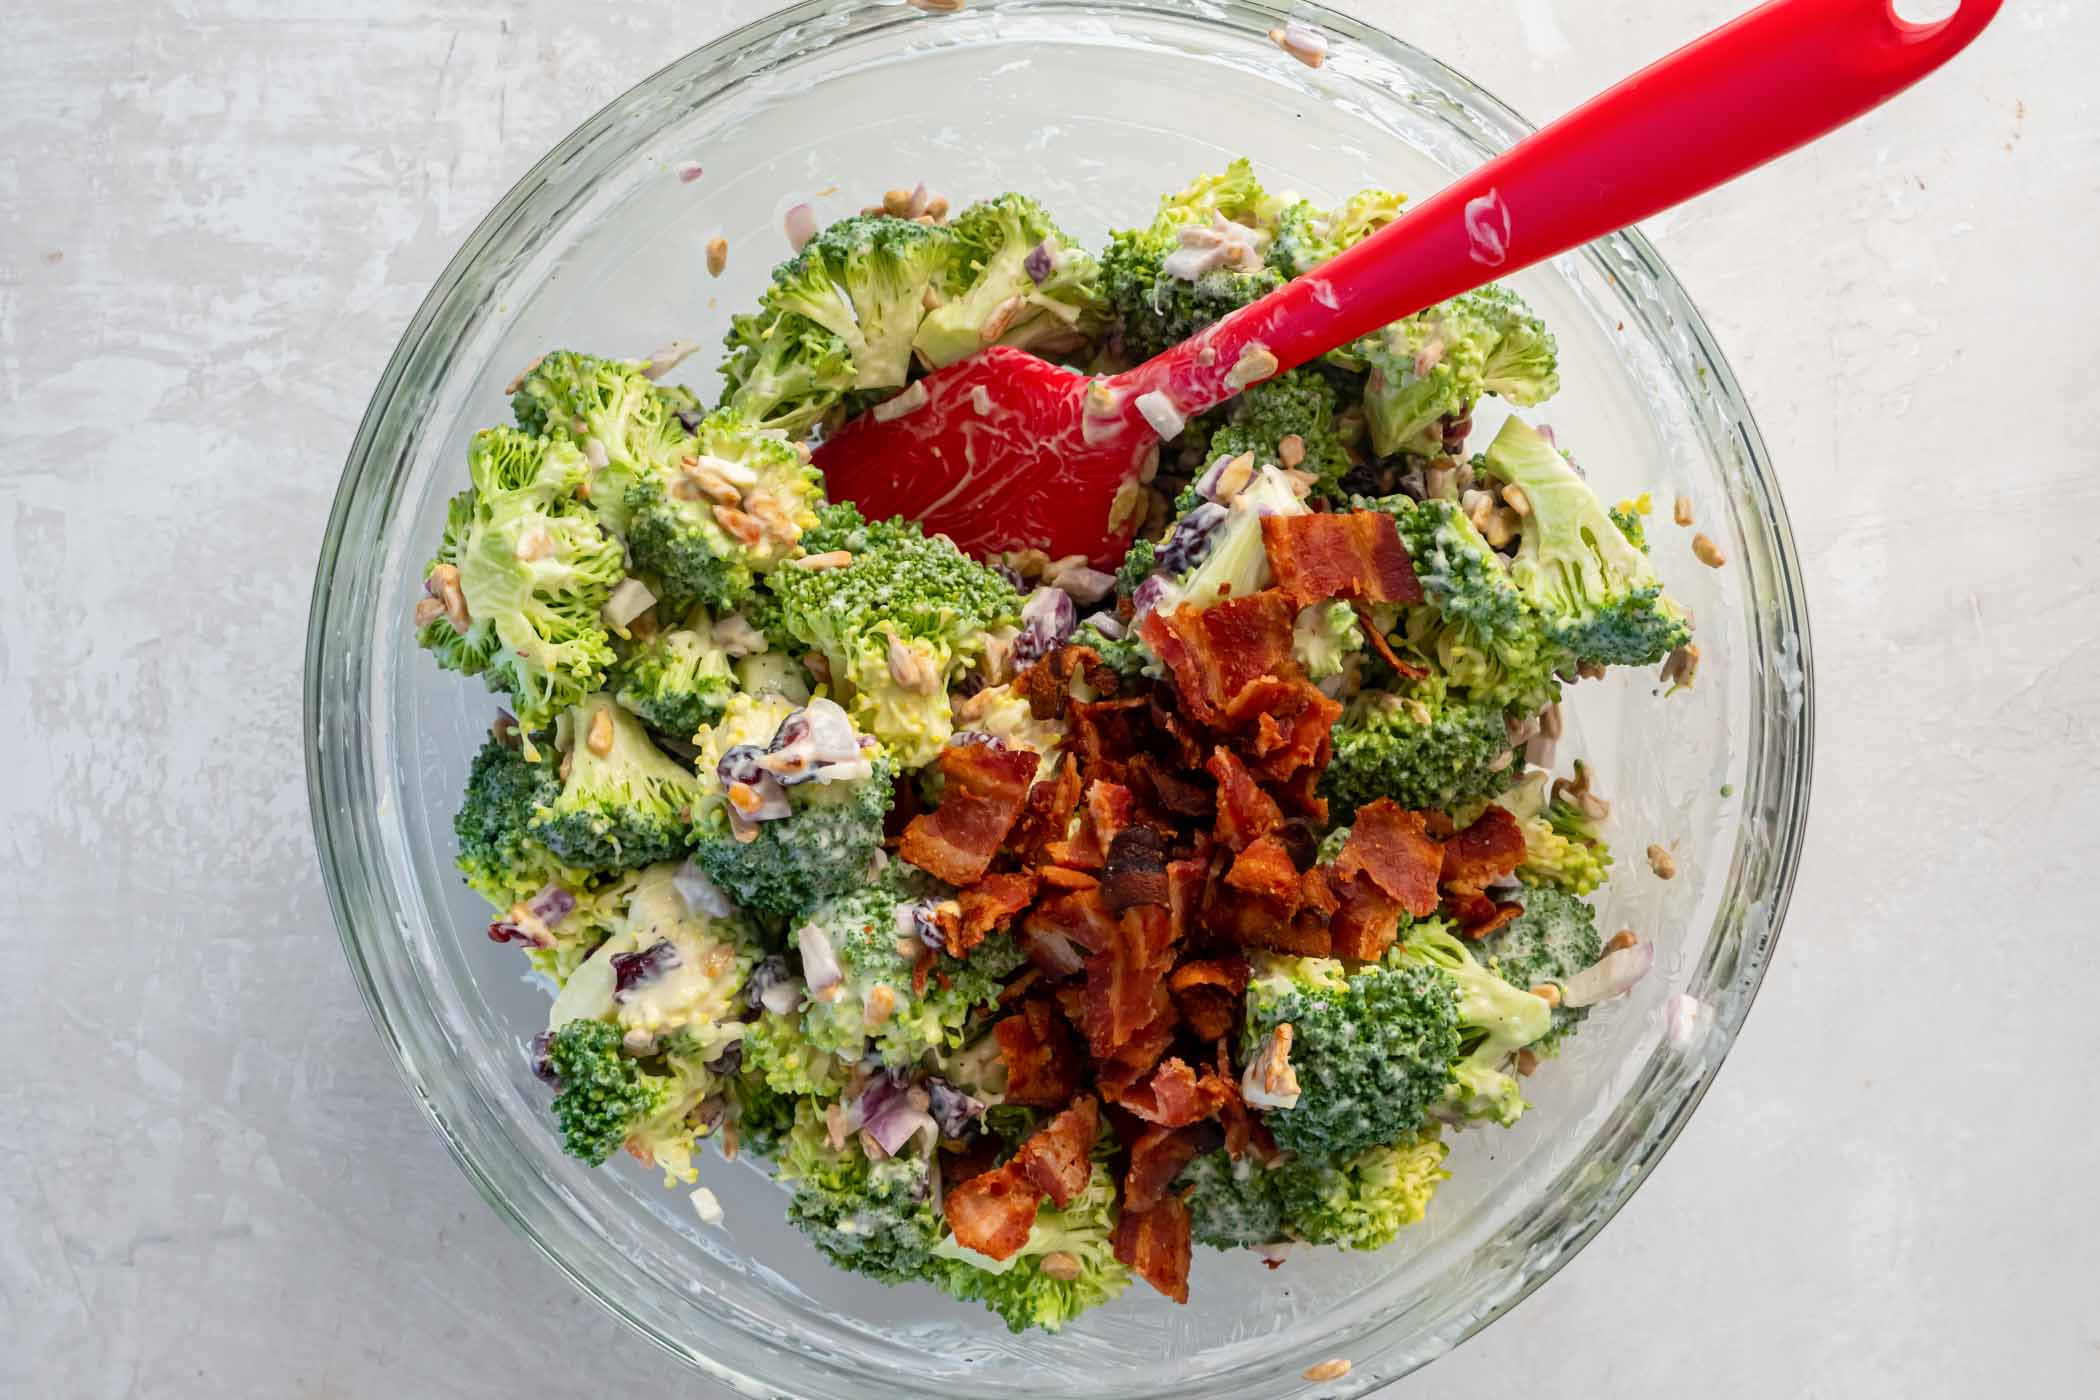 Chopped bacon added to broccoli salad in mixing bowl.